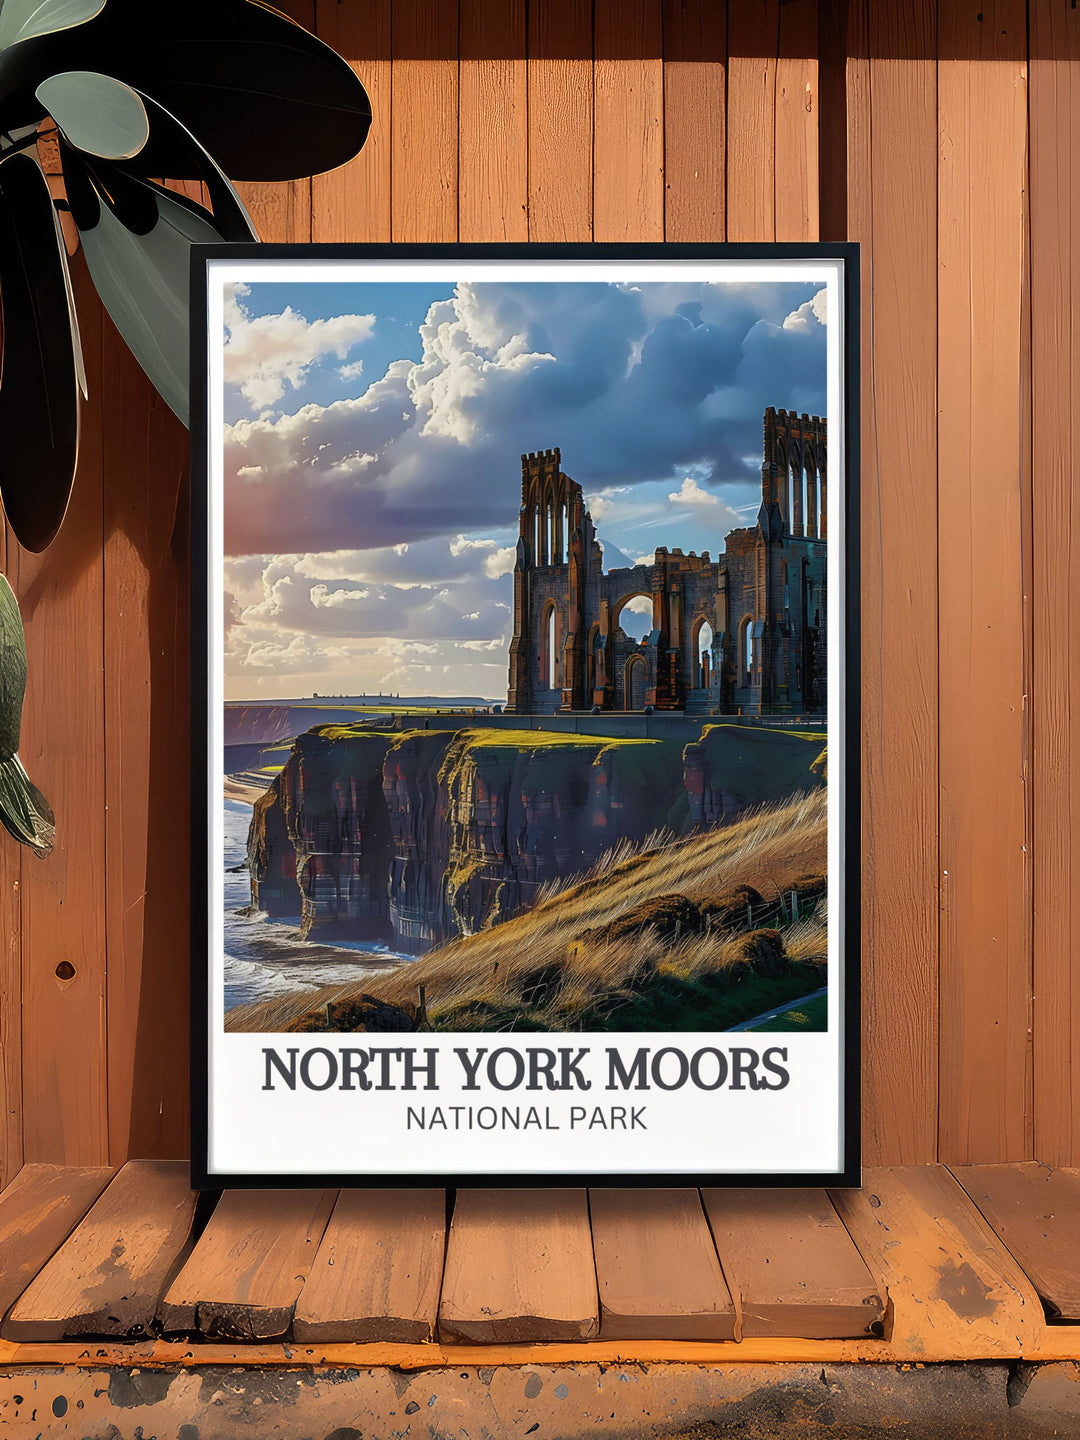 Journey through the stunning landscapes of the North York Moors with this art print, highlighting the dynamic colors and peaceful charm of this unique Yorkshire national park.